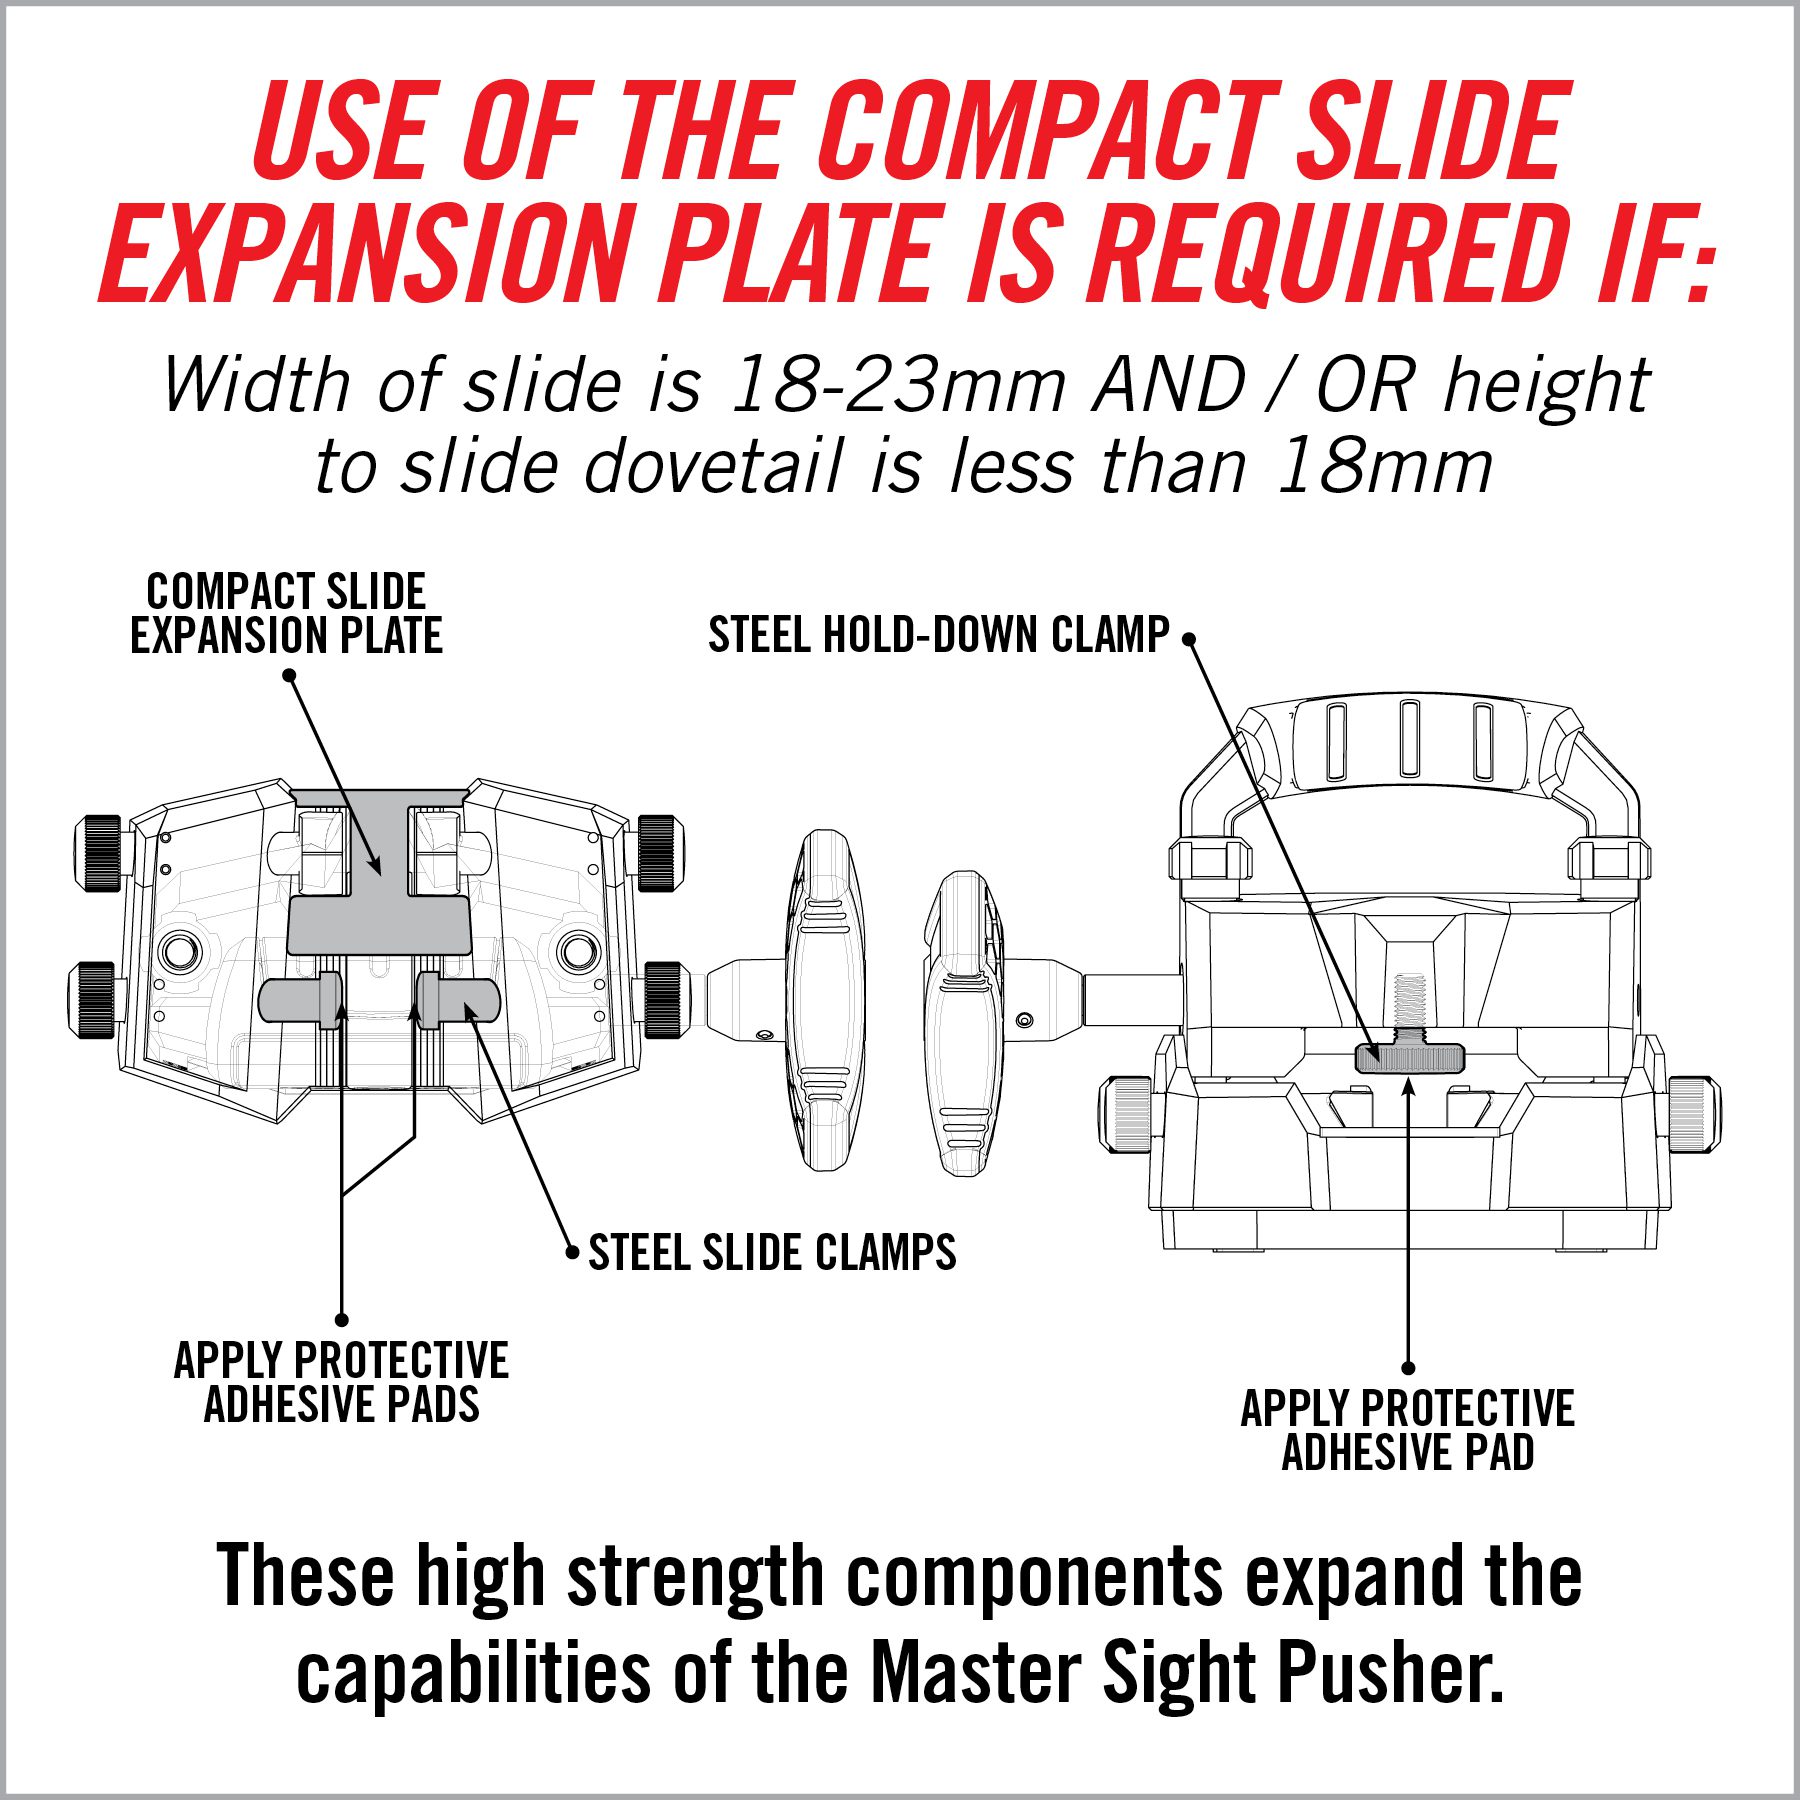 the diagram shows how to use the compact slide